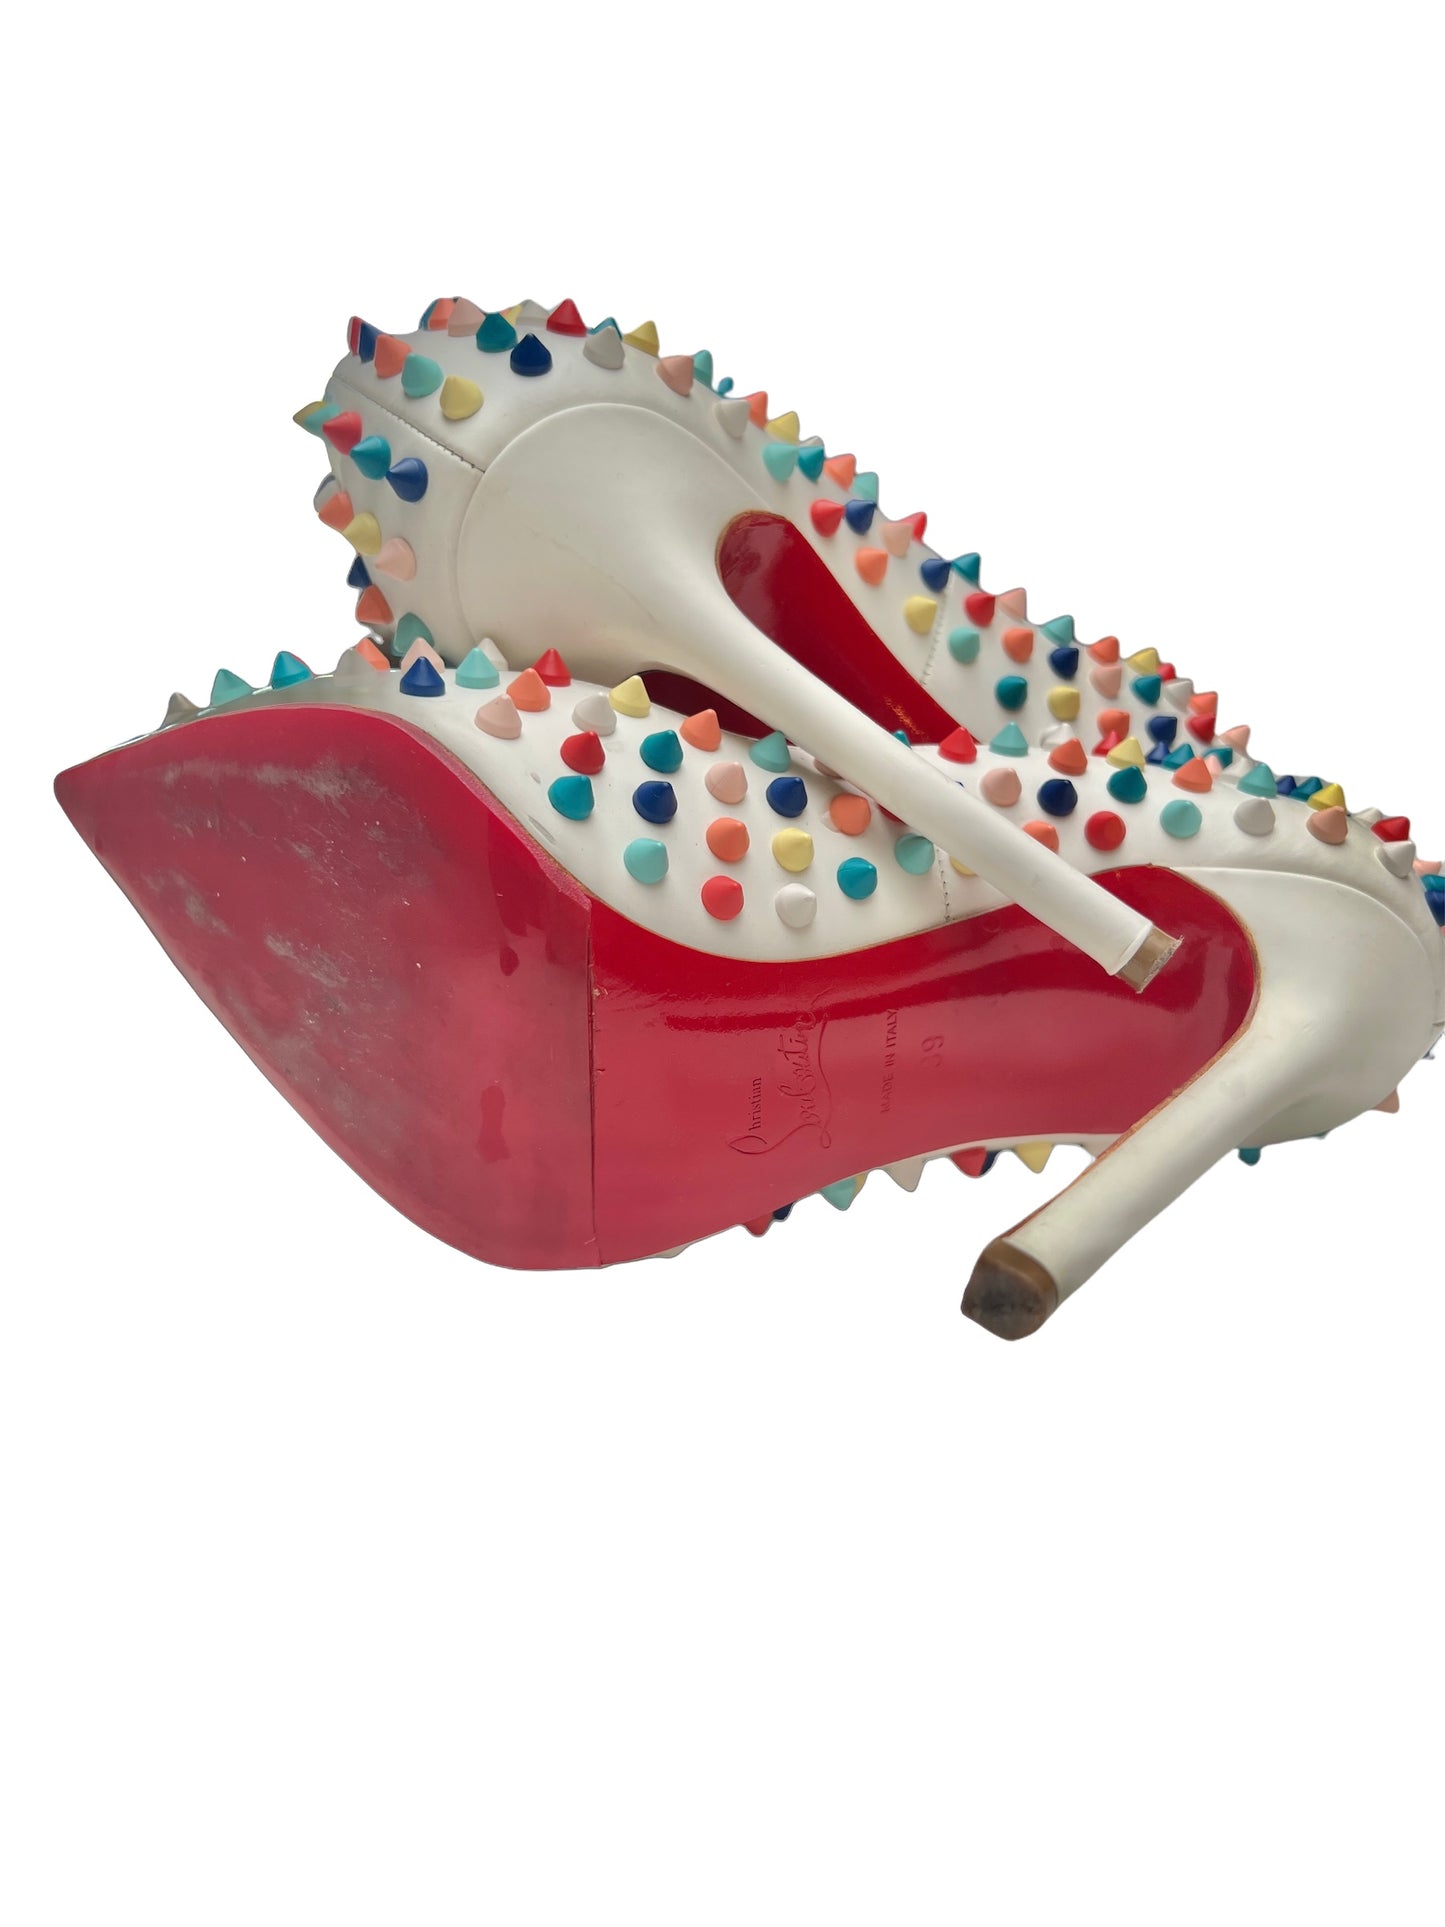 Pigalle Multicolor Spikes Heels -39